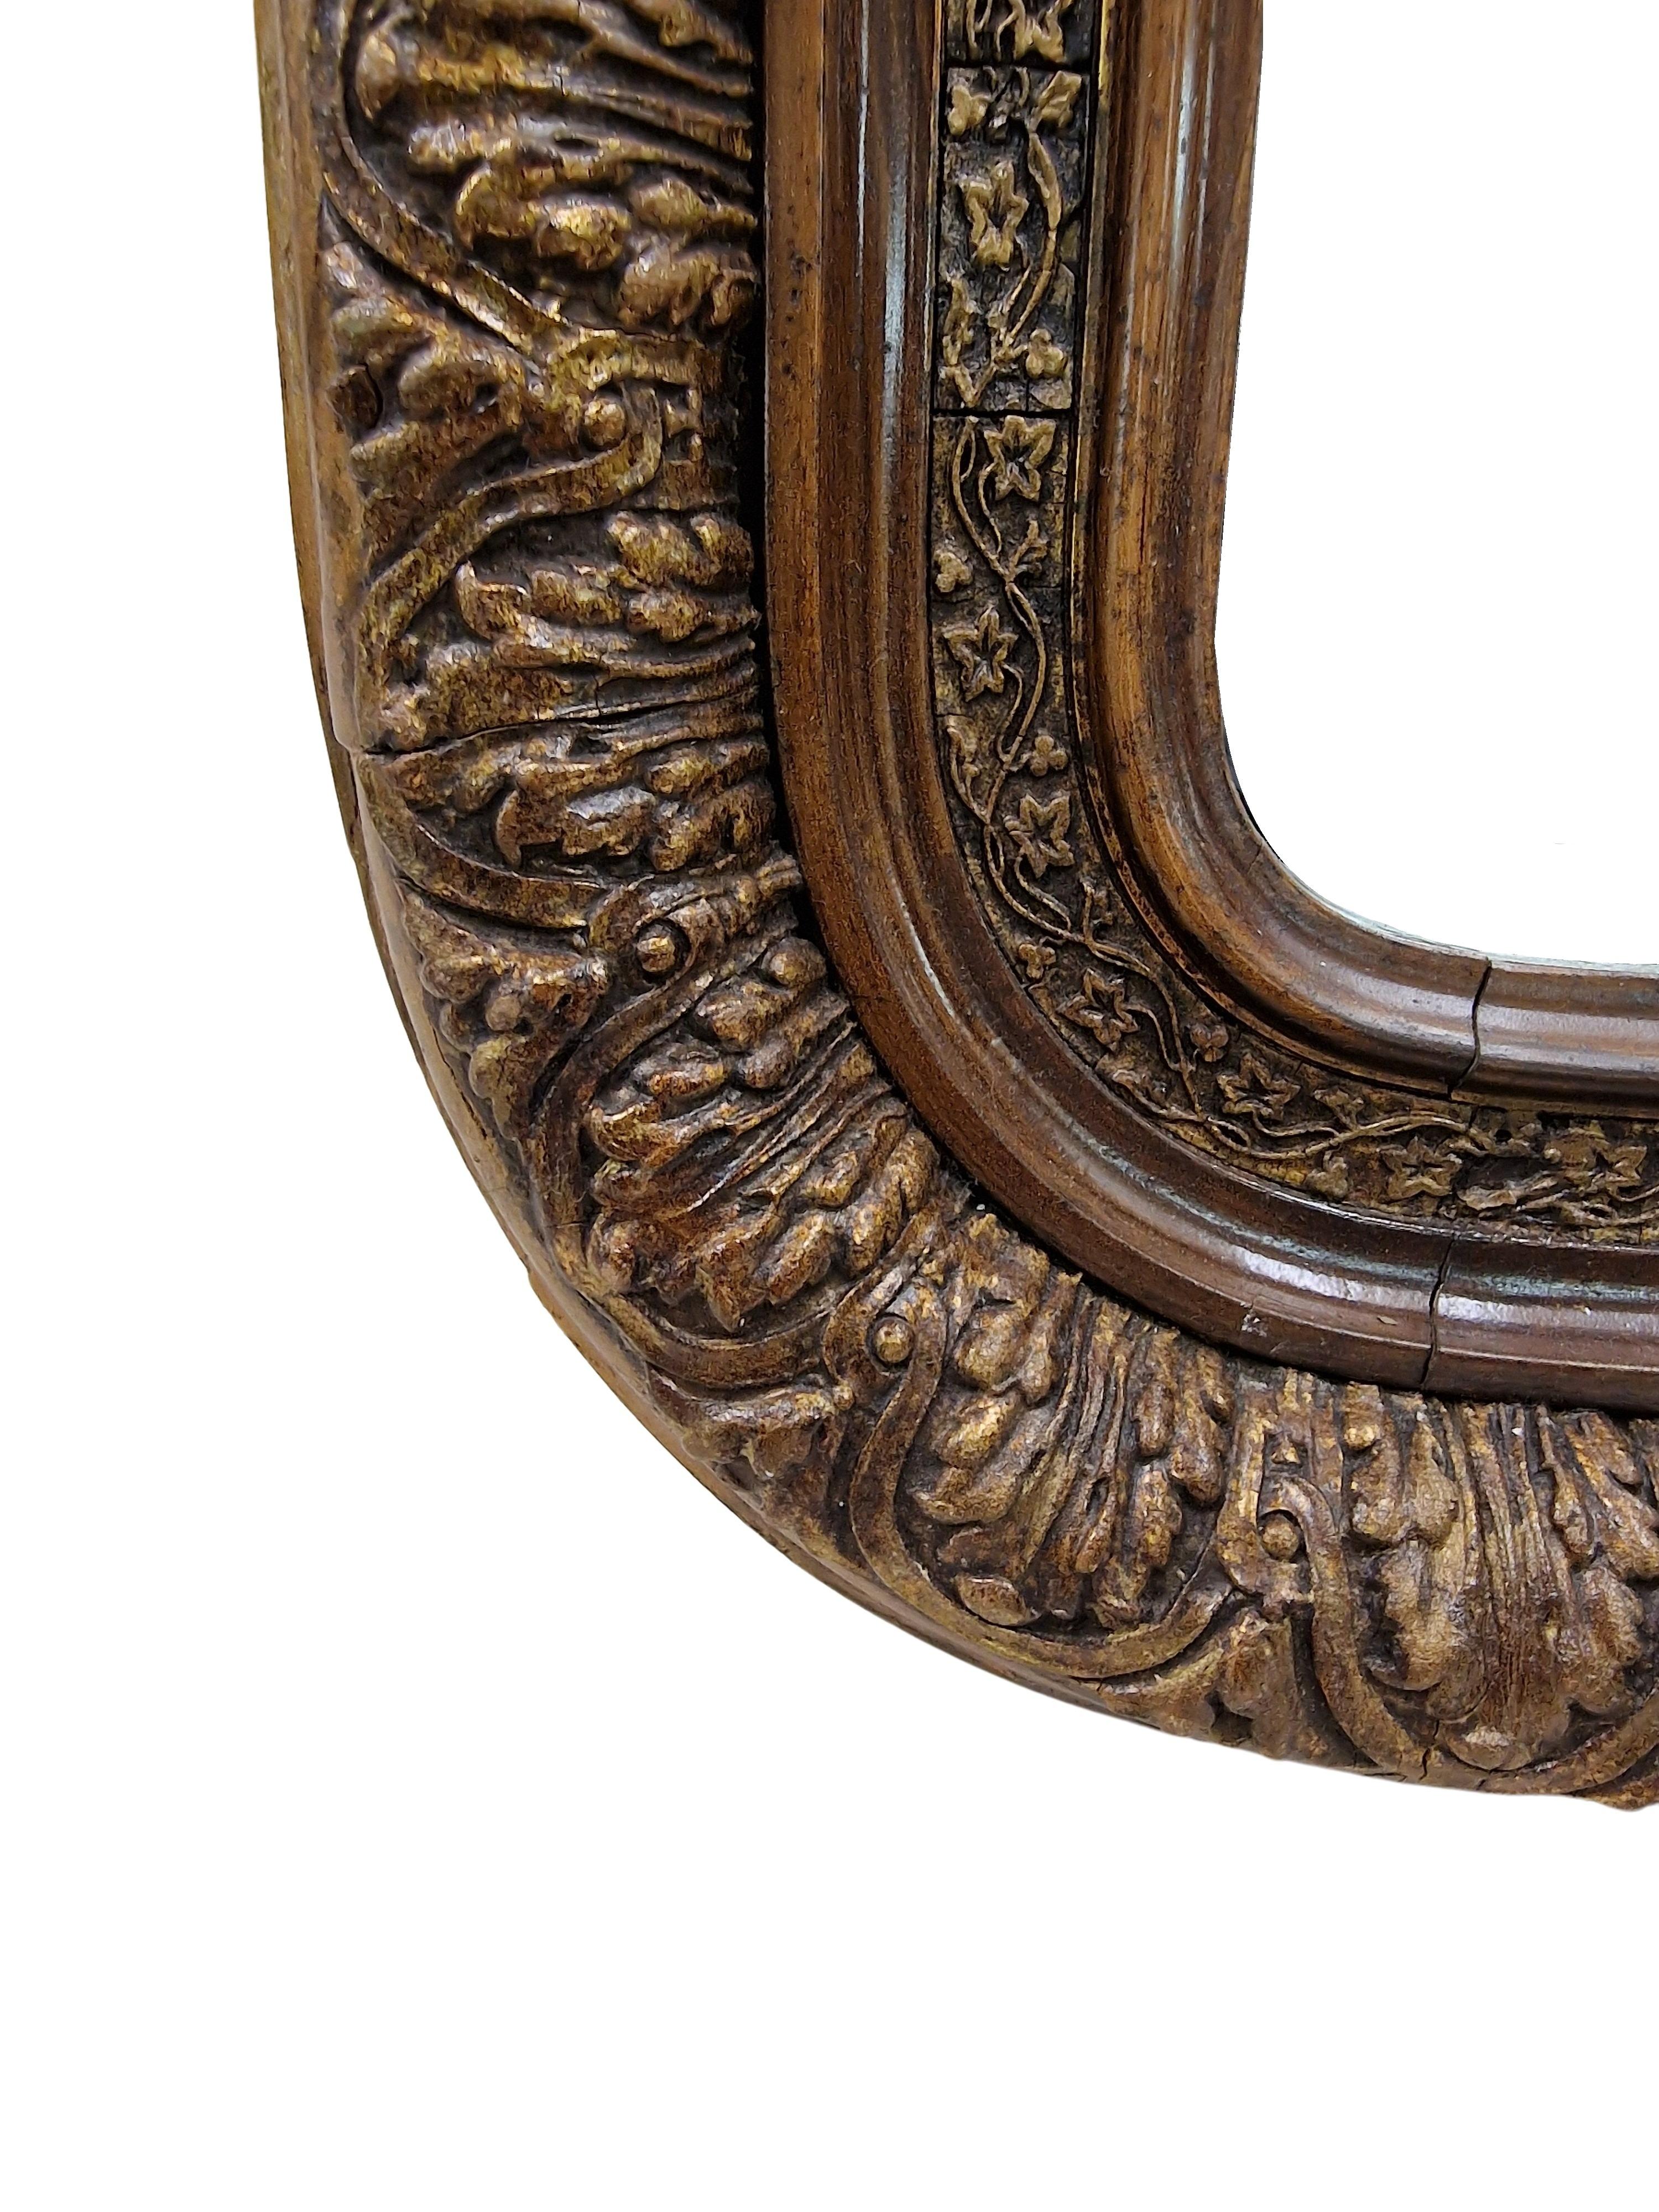 Magnificent wall mirror, frame from the time of the late Biedermeier, made around 1860-1870, in Austria. 

The frame strip is wonderfully designed with two different decorative strips. The outer area is designed with acanthus leaves running